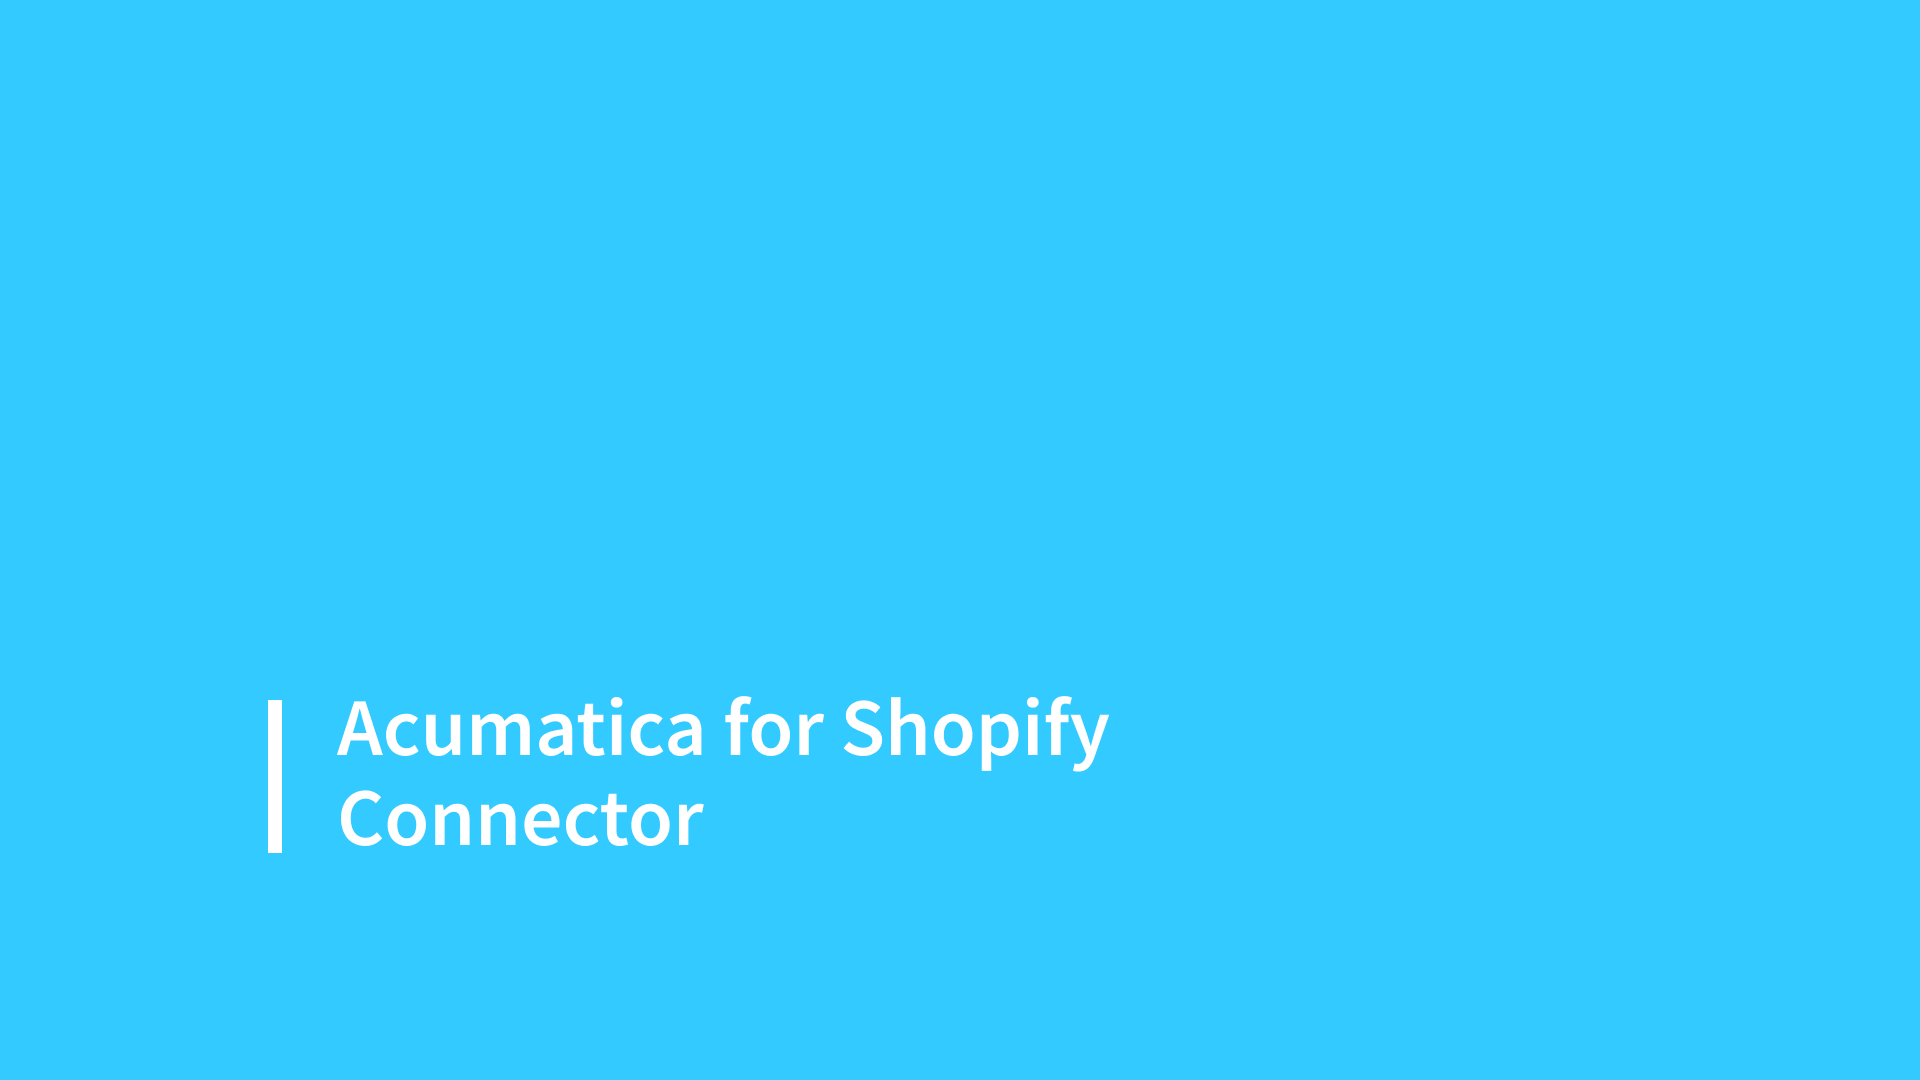 Commerce Edition - Shopify Connector Brief Intro